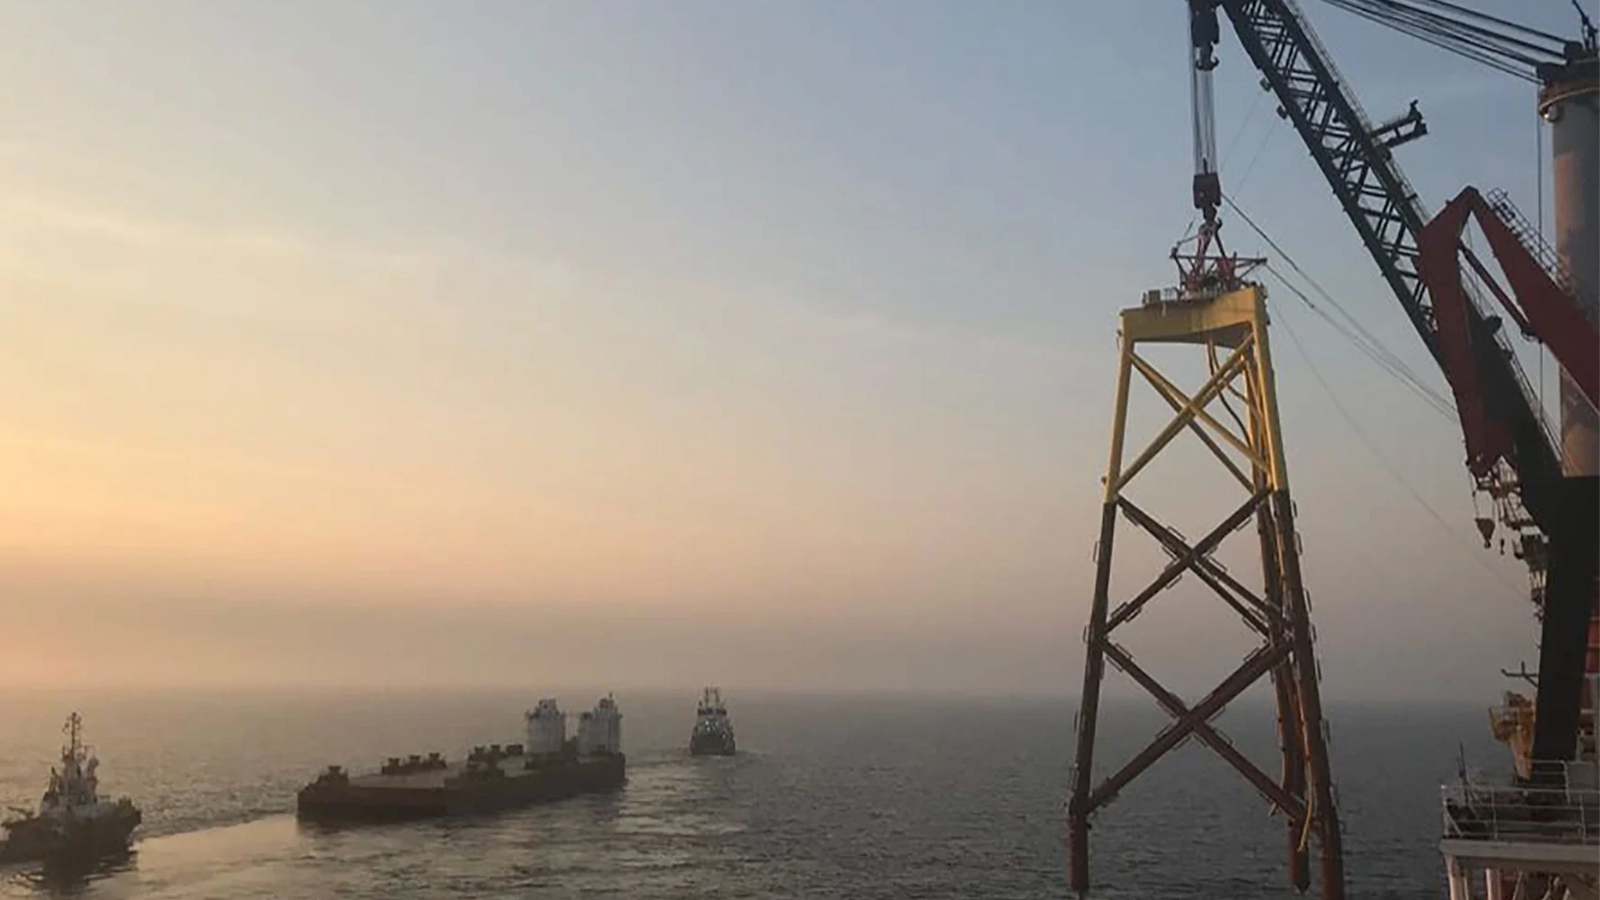 Offshore wind turbine being built at sea